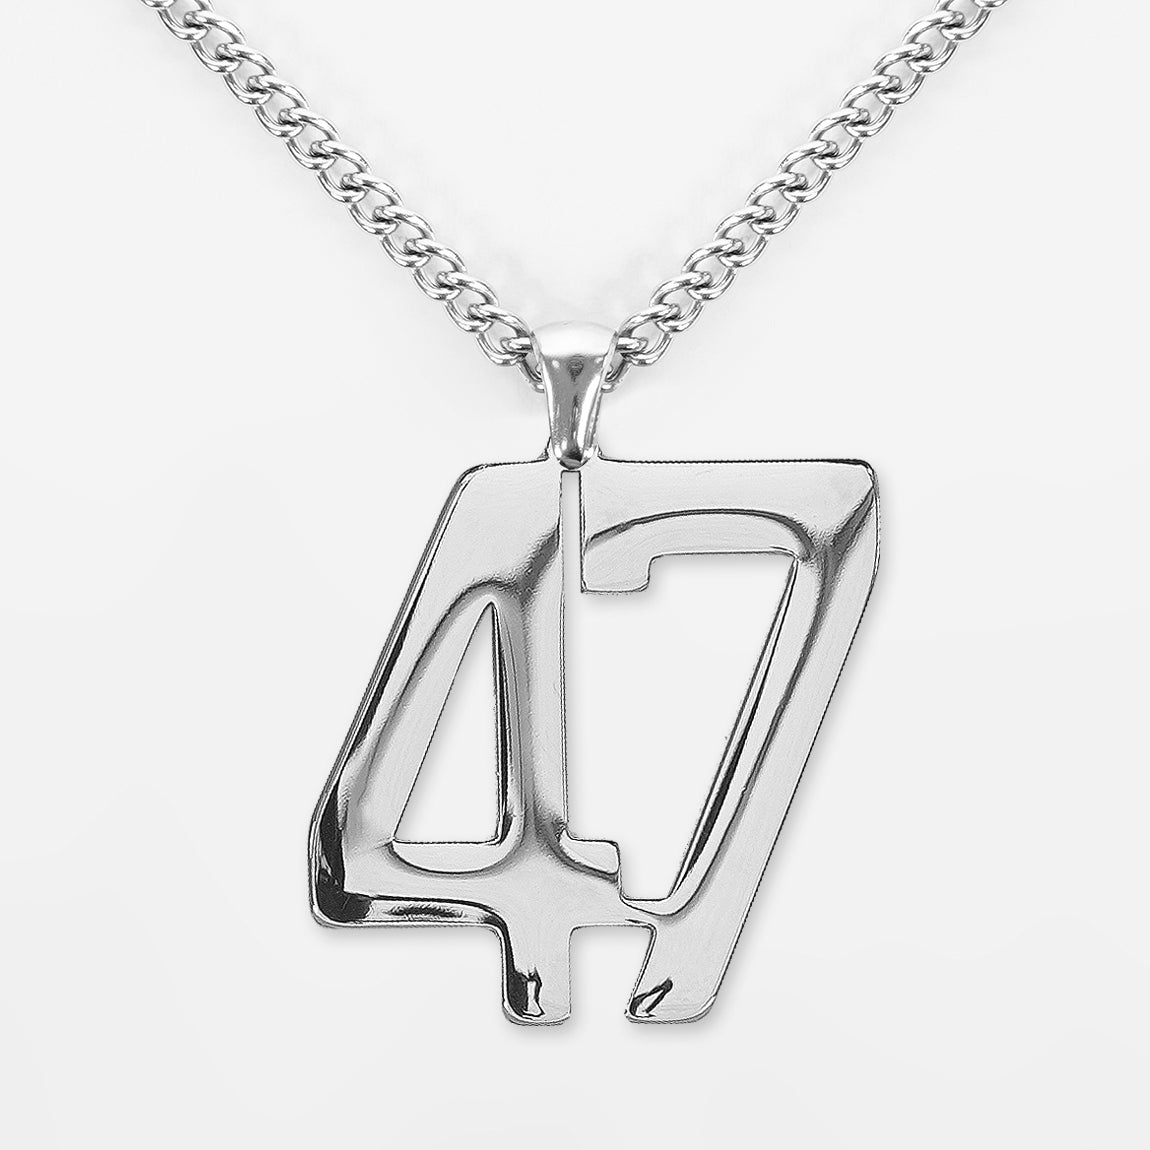 47 Number Pendant with Chain Necklace - Stainless Steel